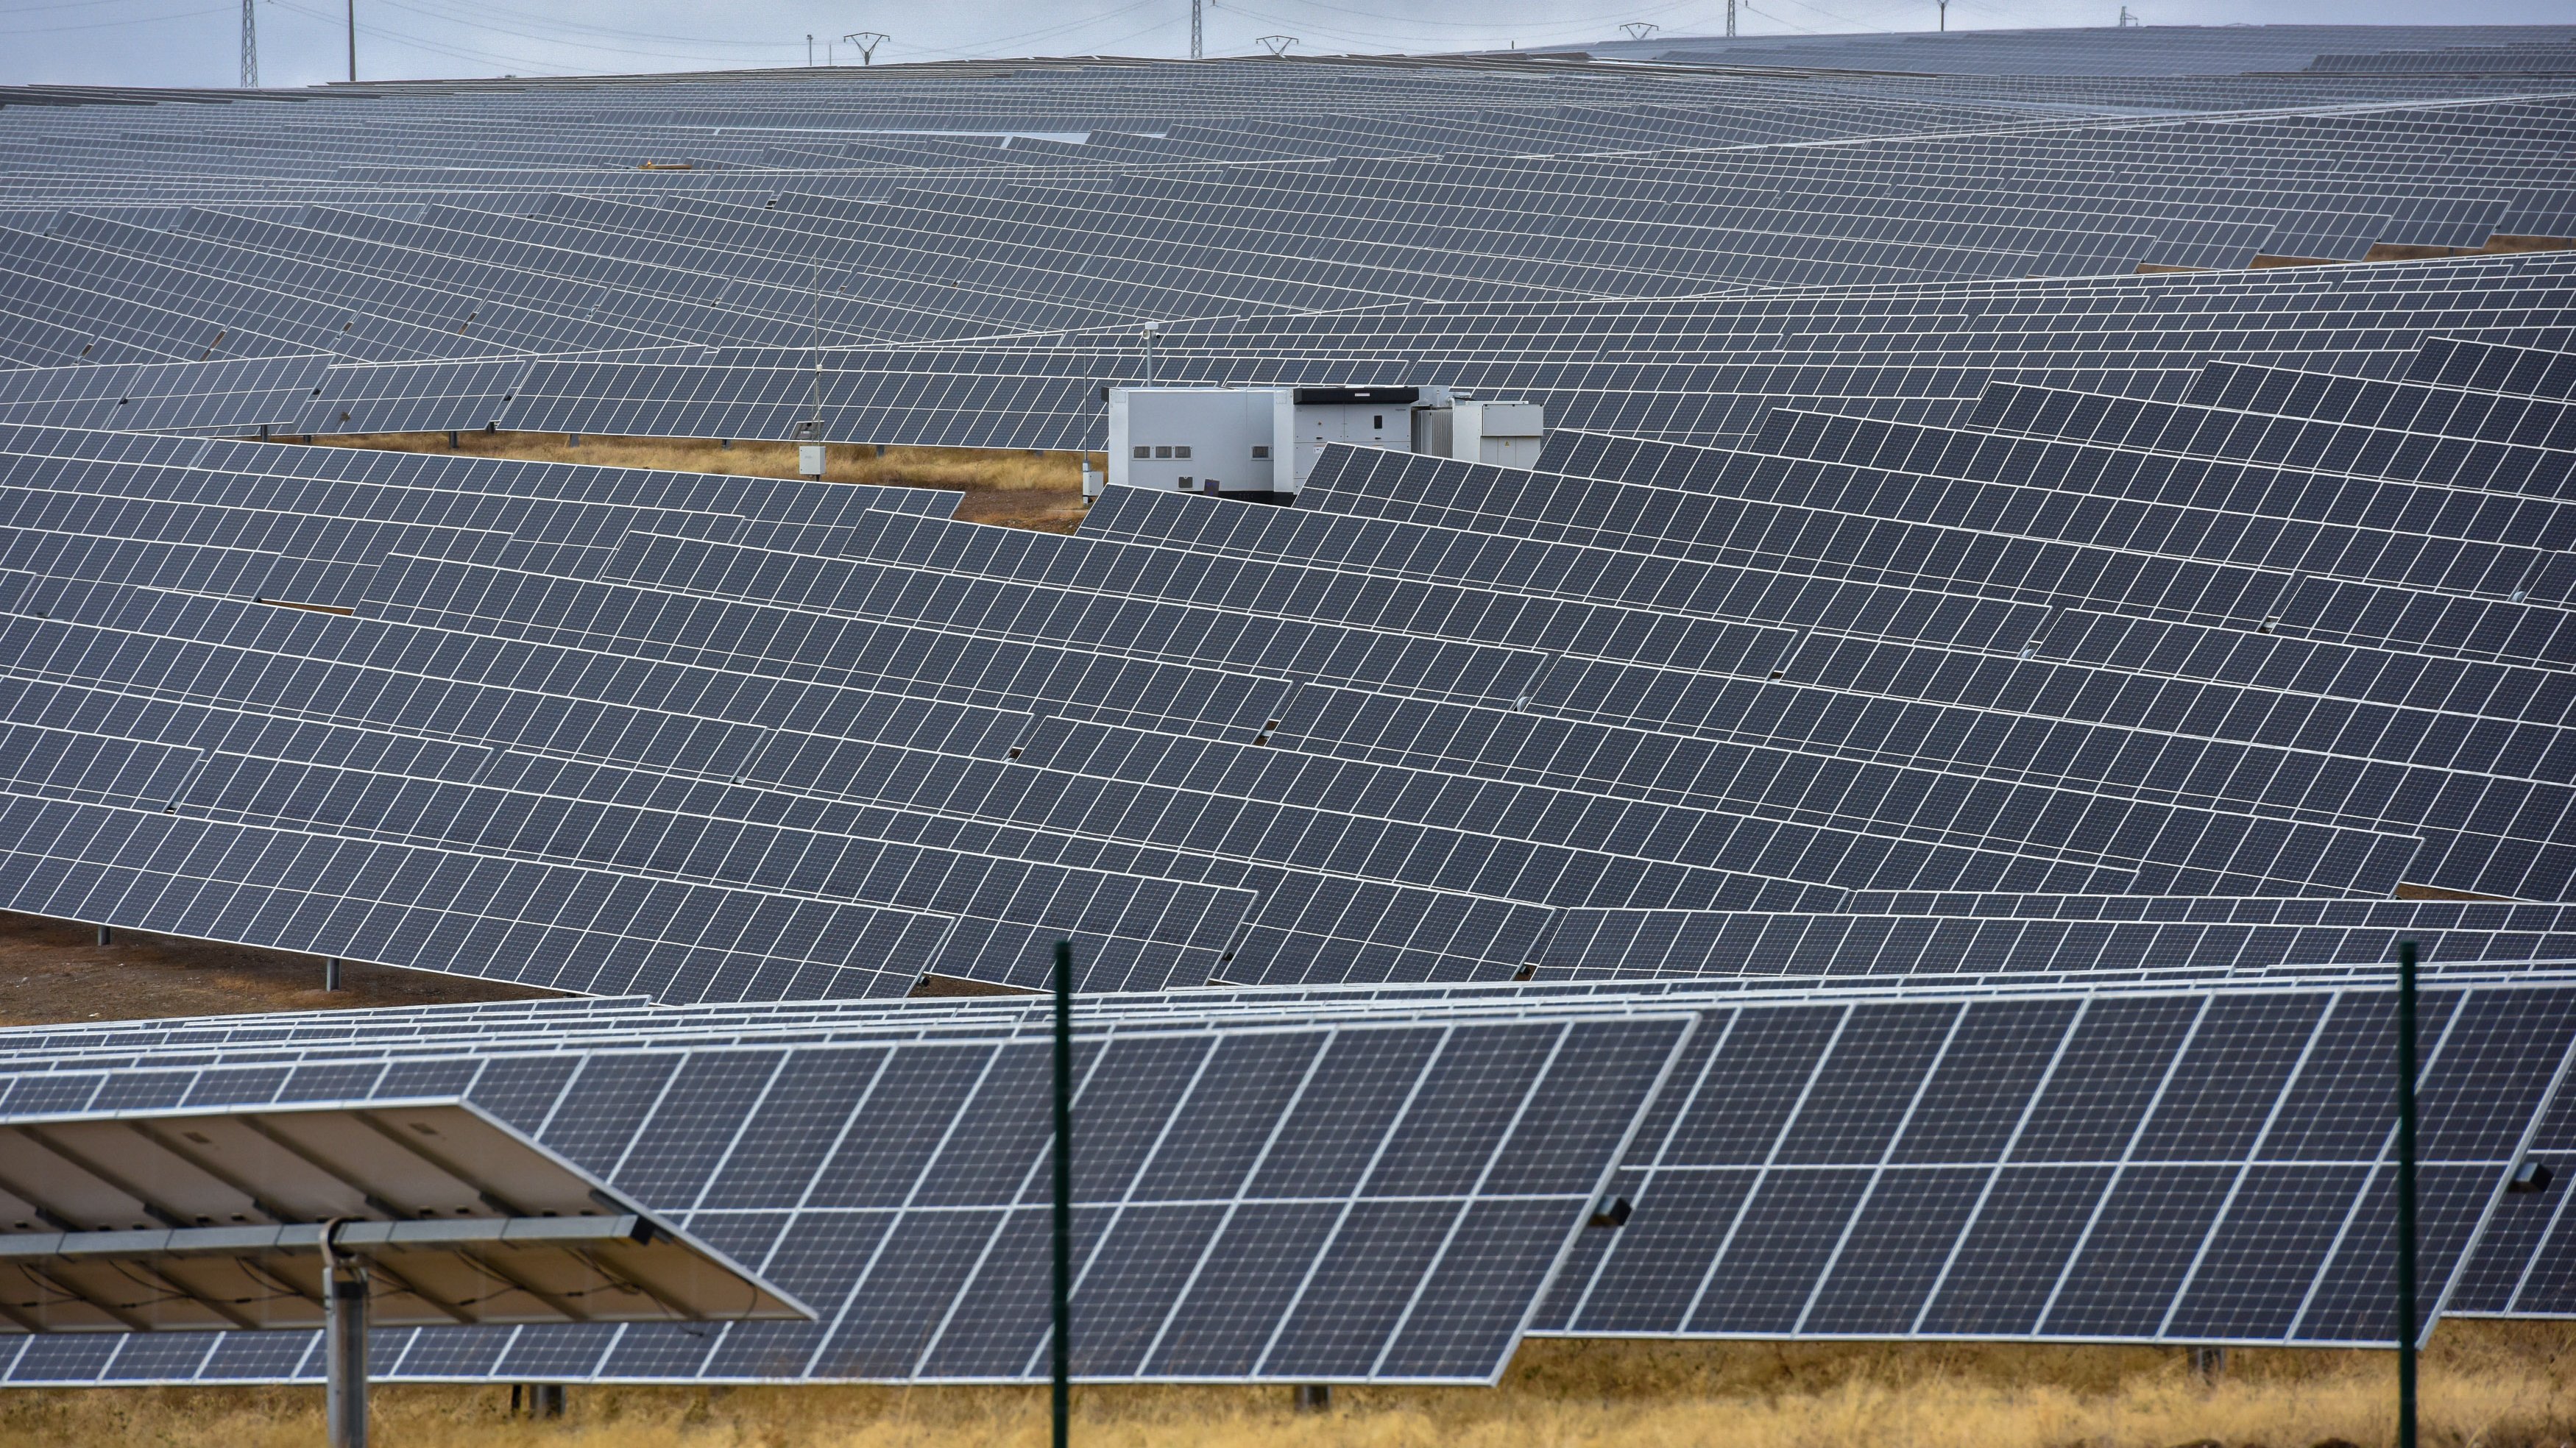 The Ceclavin´s photovoltaic plant built and managed by